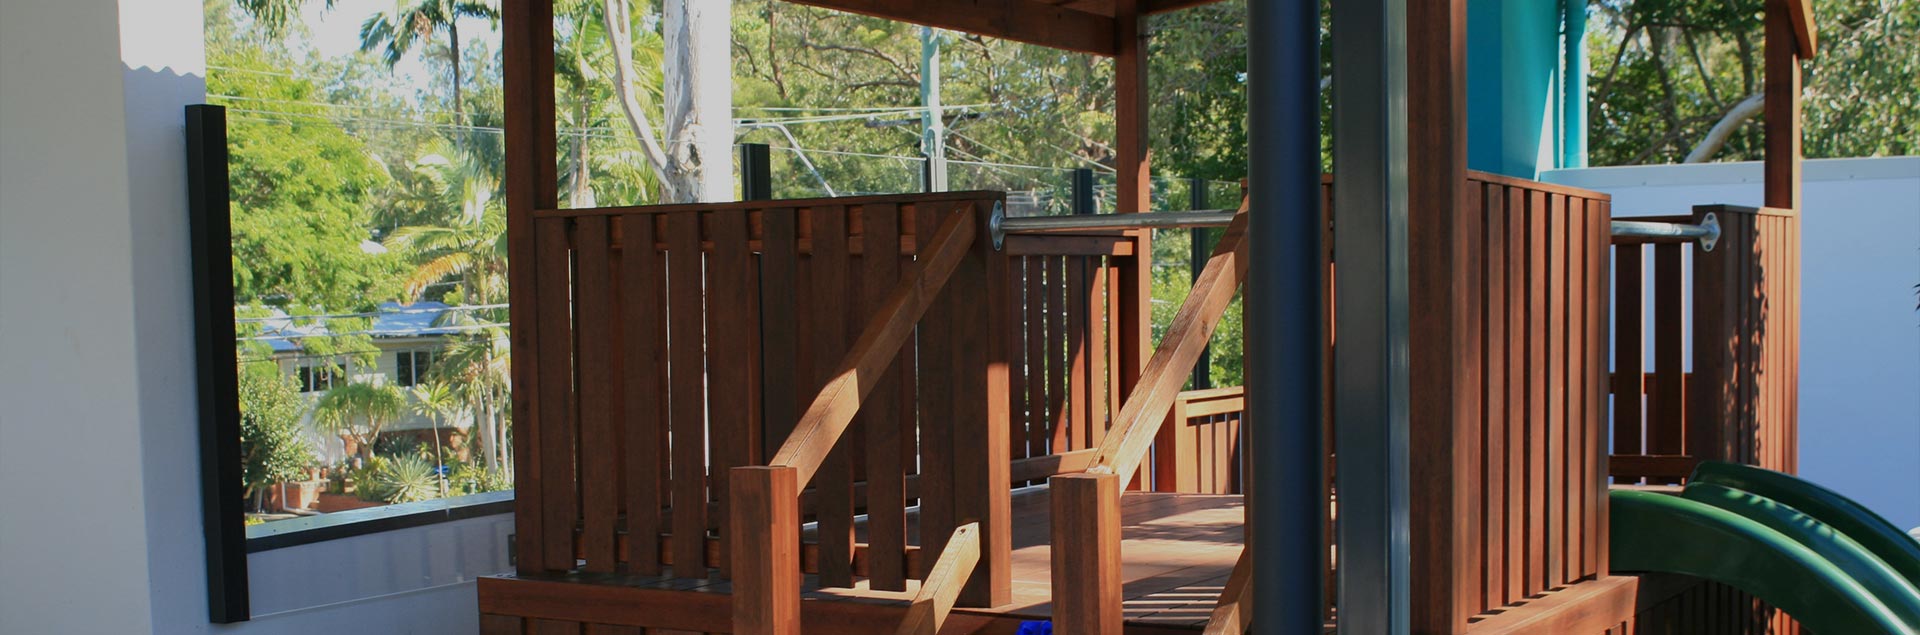 Keeping Your Home Playground Pest-Free: Essential Tips and Strategies